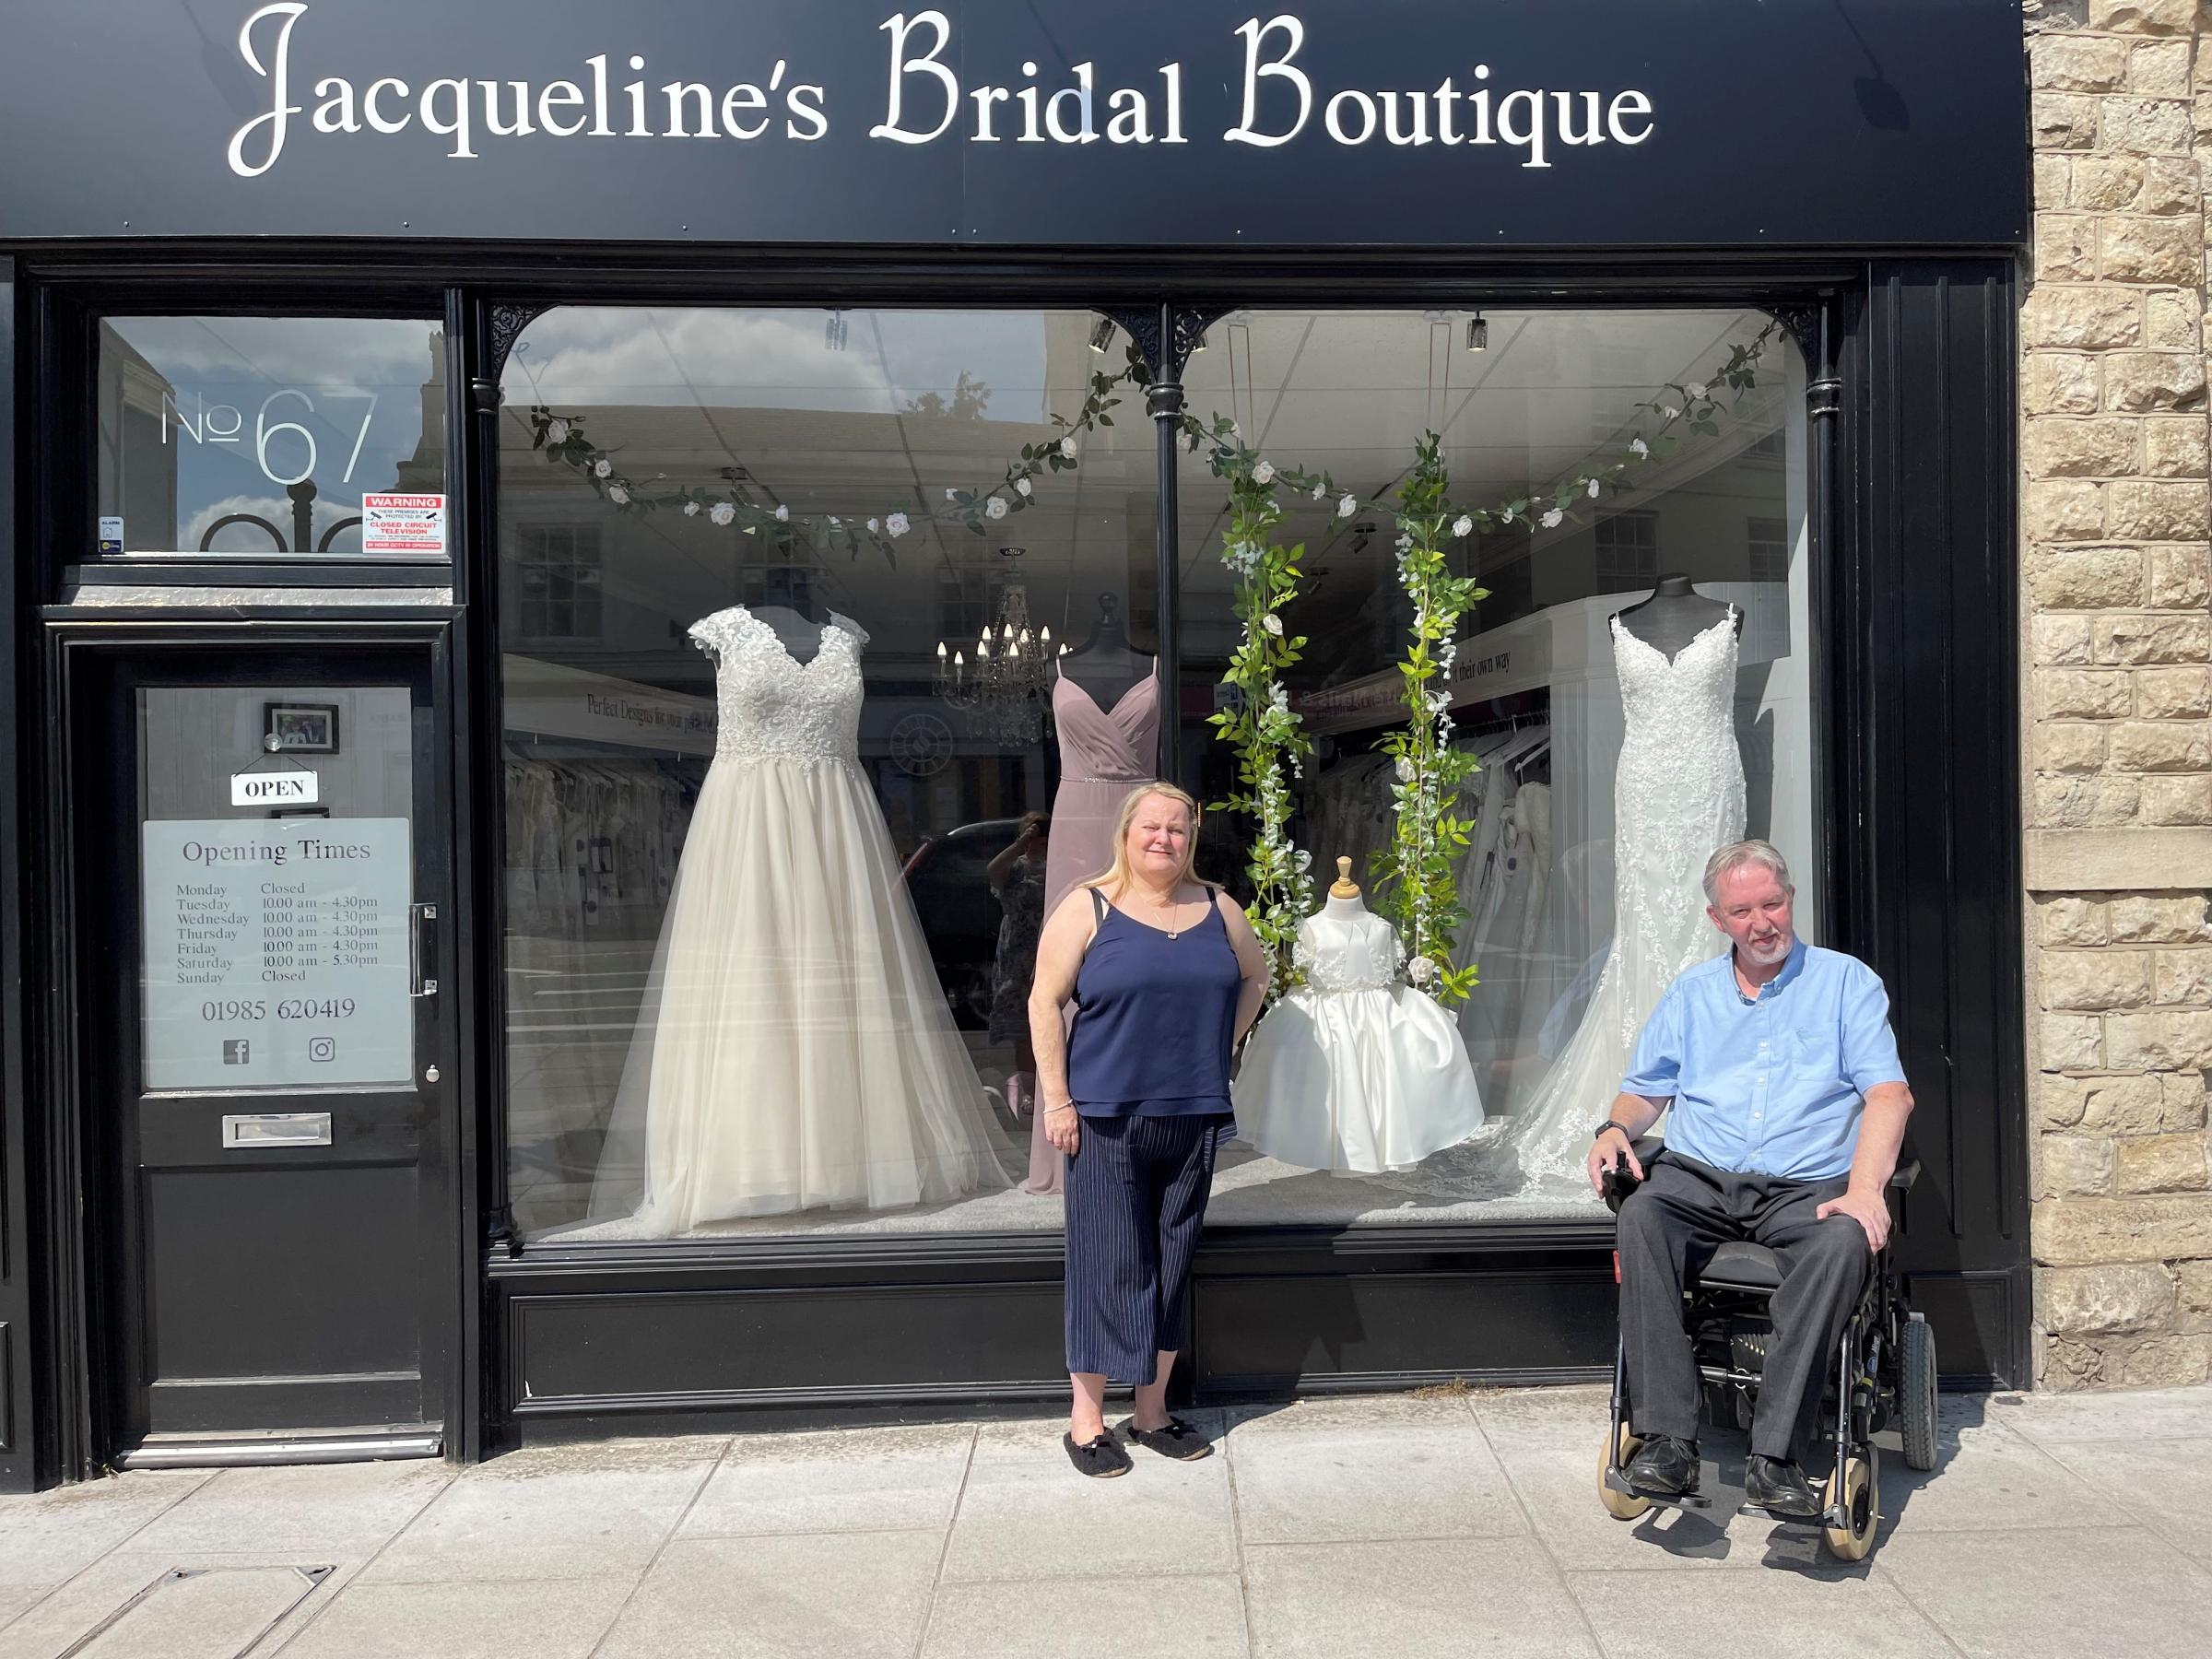 Bridal boutique still going strong ...